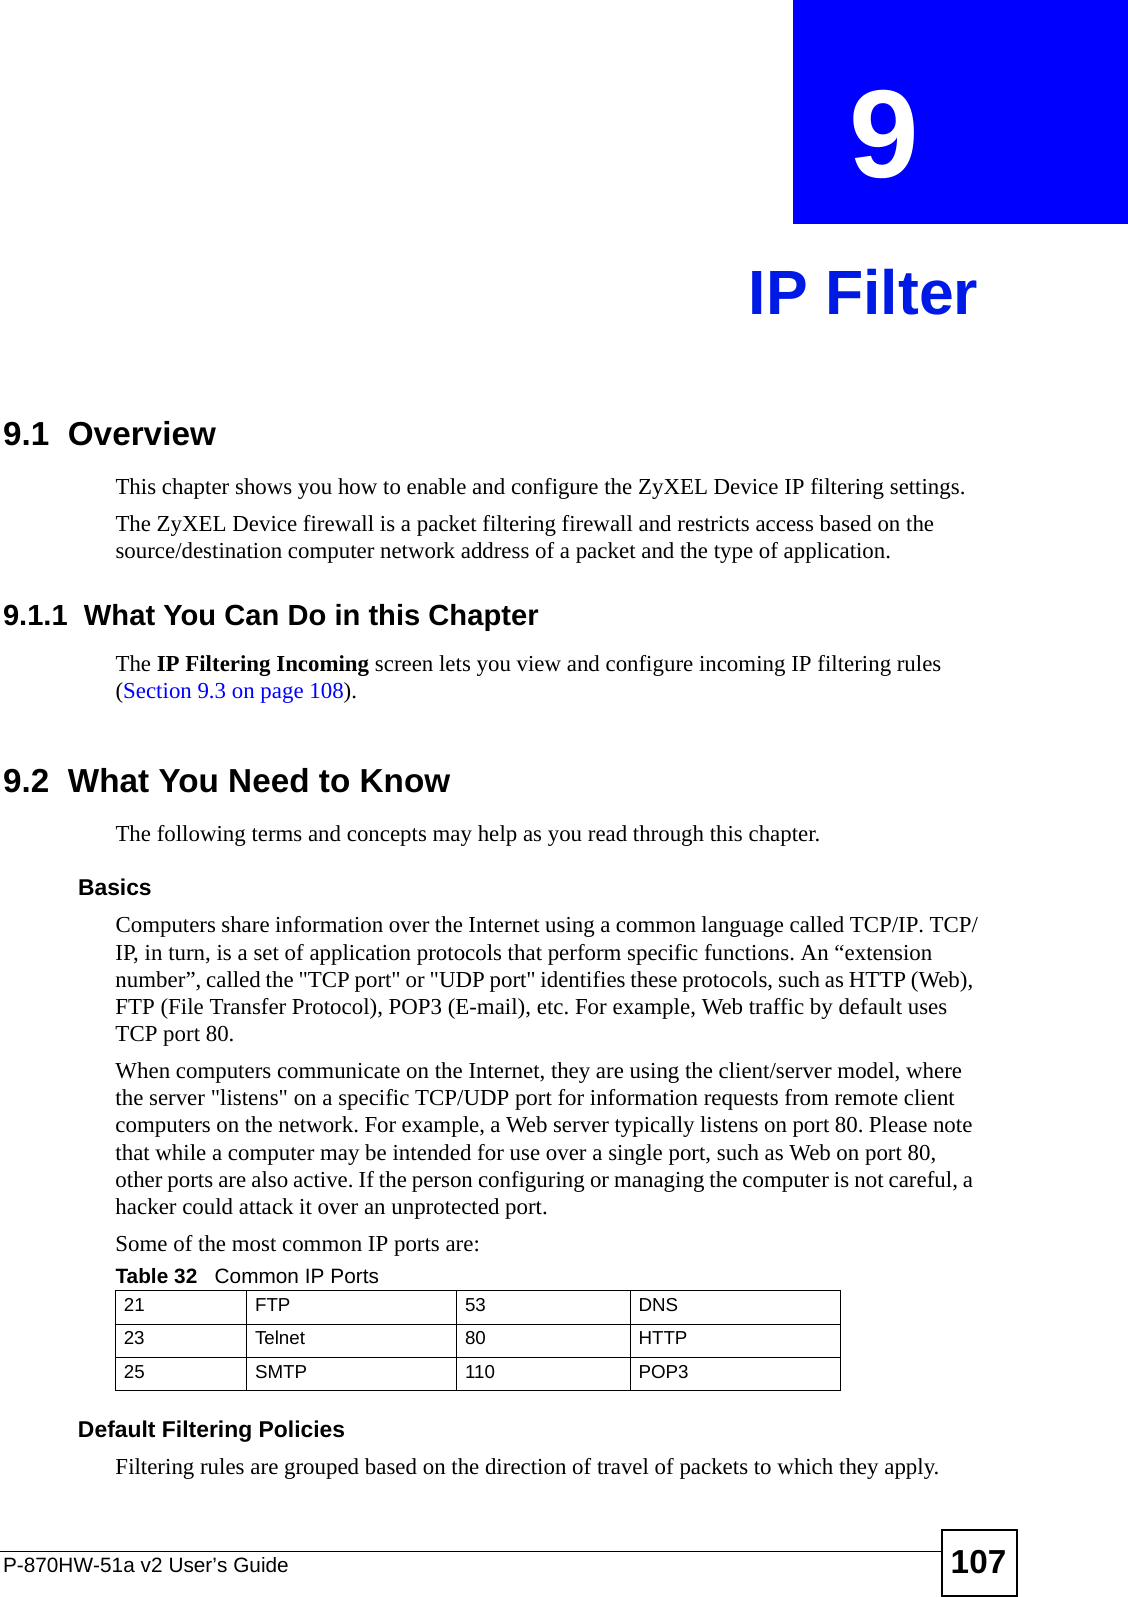 P-870HW-51a v2 User’s Guide 107CHAPTER  9 IP Filter9.1  Overview This chapter shows you how to enable and configure the ZyXEL Device IP filtering settings.The ZyXEL Device firewall is a packet filtering firewall and restricts access based on the source/destination computer network address of a packet and the type of application. 9.1.1  What You Can Do in this ChapterThe IP Filtering Incoming screen lets you view and configure incoming IP filtering rules (Section 9.3 on page 108).9.2  What You Need to KnowThe following terms and concepts may help as you read through this chapter.BasicsComputers share information over the Internet using a common language called TCP/IP. TCP/IP, in turn, is a set of application protocols that perform specific functions. An “extension number”, called the &quot;TCP port&quot; or &quot;UDP port&quot; identifies these protocols, such as HTTP (Web), FTP (File Transfer Protocol), POP3 (E-mail), etc. For example, Web traffic by default uses TCP port 80. When computers communicate on the Internet, they are using the client/server model, where the server &quot;listens&quot; on a specific TCP/UDP port for information requests from remote client computers on the network. For example, a Web server typically listens on port 80. Please note that while a computer may be intended for use over a single port, such as Web on port 80, other ports are also active. If the person configuring or managing the computer is not careful, a hacker could attack it over an unprotected port. Some of the most common IP ports are: Default Filtering Policies Filtering rules are grouped based on the direction of travel of packets to which they apply. Table 32   Common IP Ports21 FTP 53 DNS23 Telnet 80 HTTP25 SMTP 110 POP3